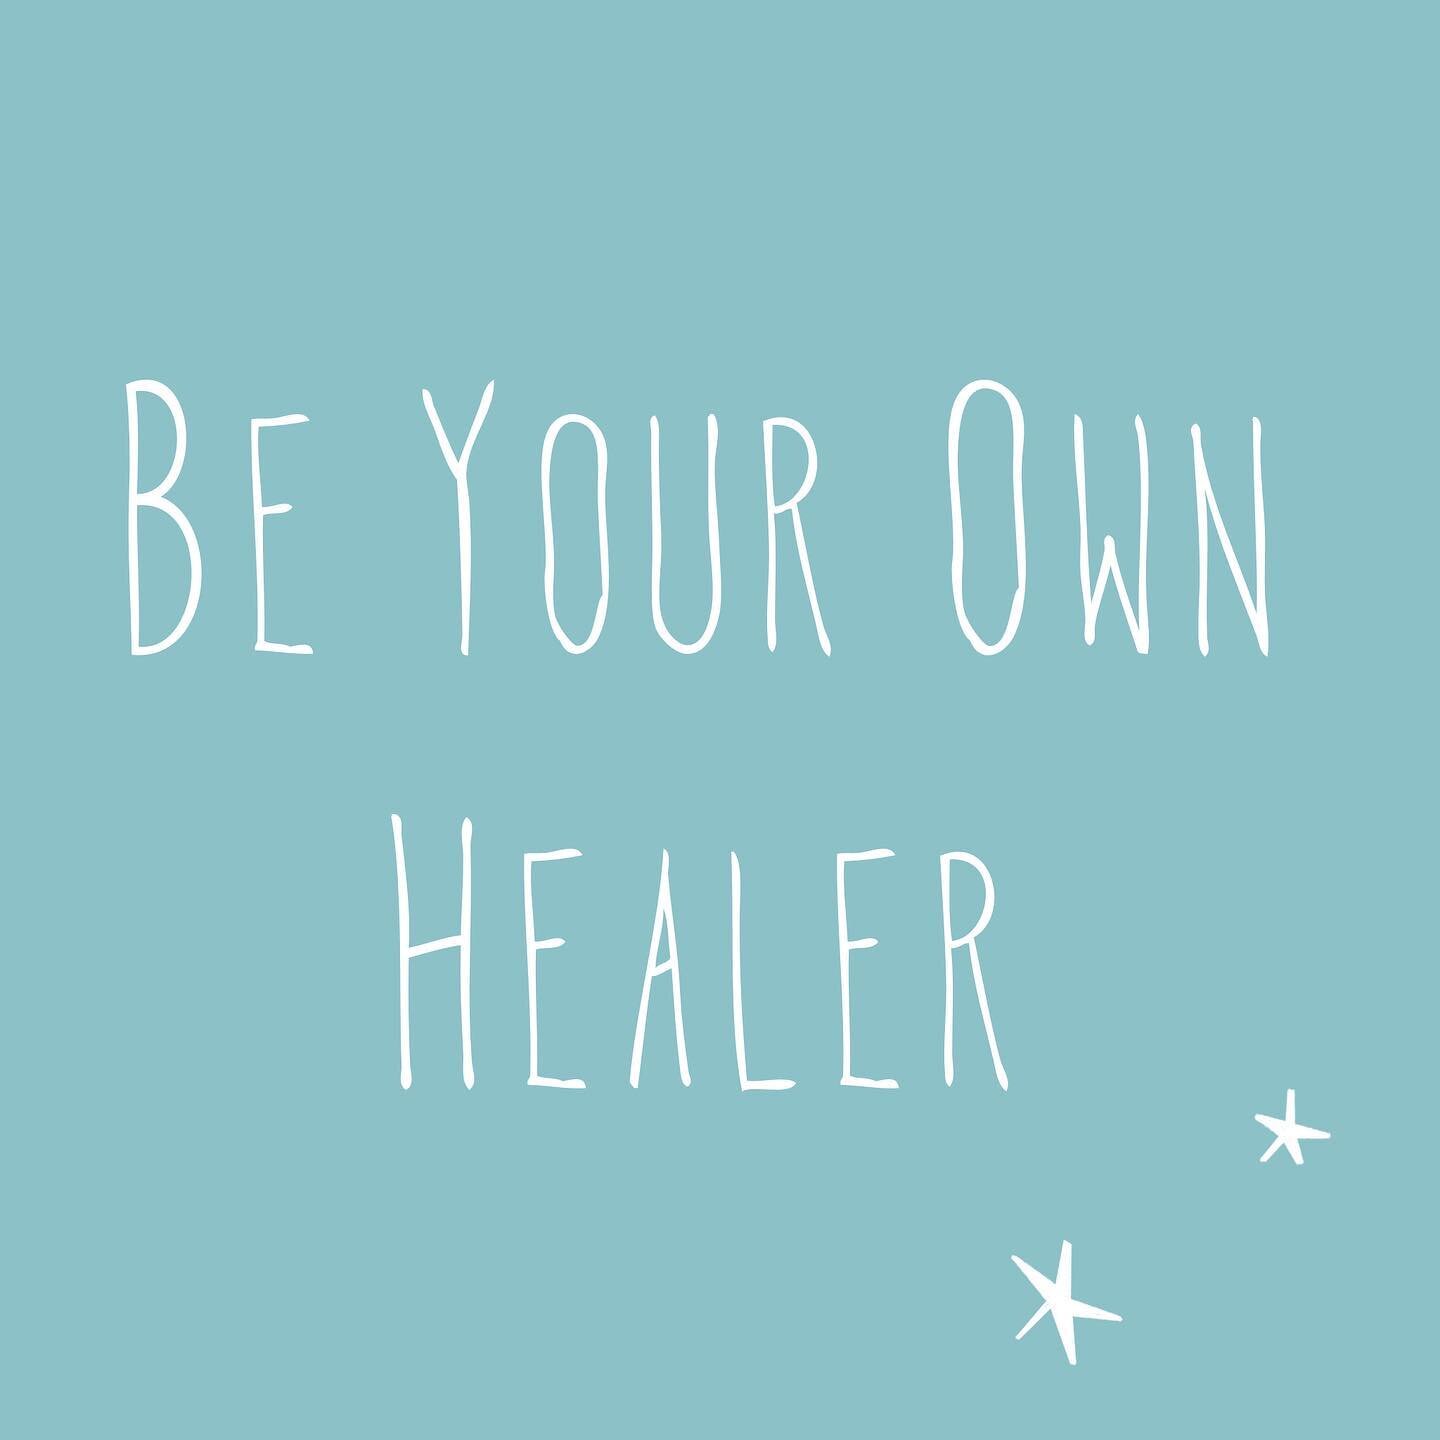 BE YOUR OWN HEALER 

Classes coming soon! ✨

I&rsquo;m very excited to announce that I&rsquo;ve been working on a brand new offering - a  holistic range of sound, highly effective, easy to learn self-care and self-healing practices to incorporate int